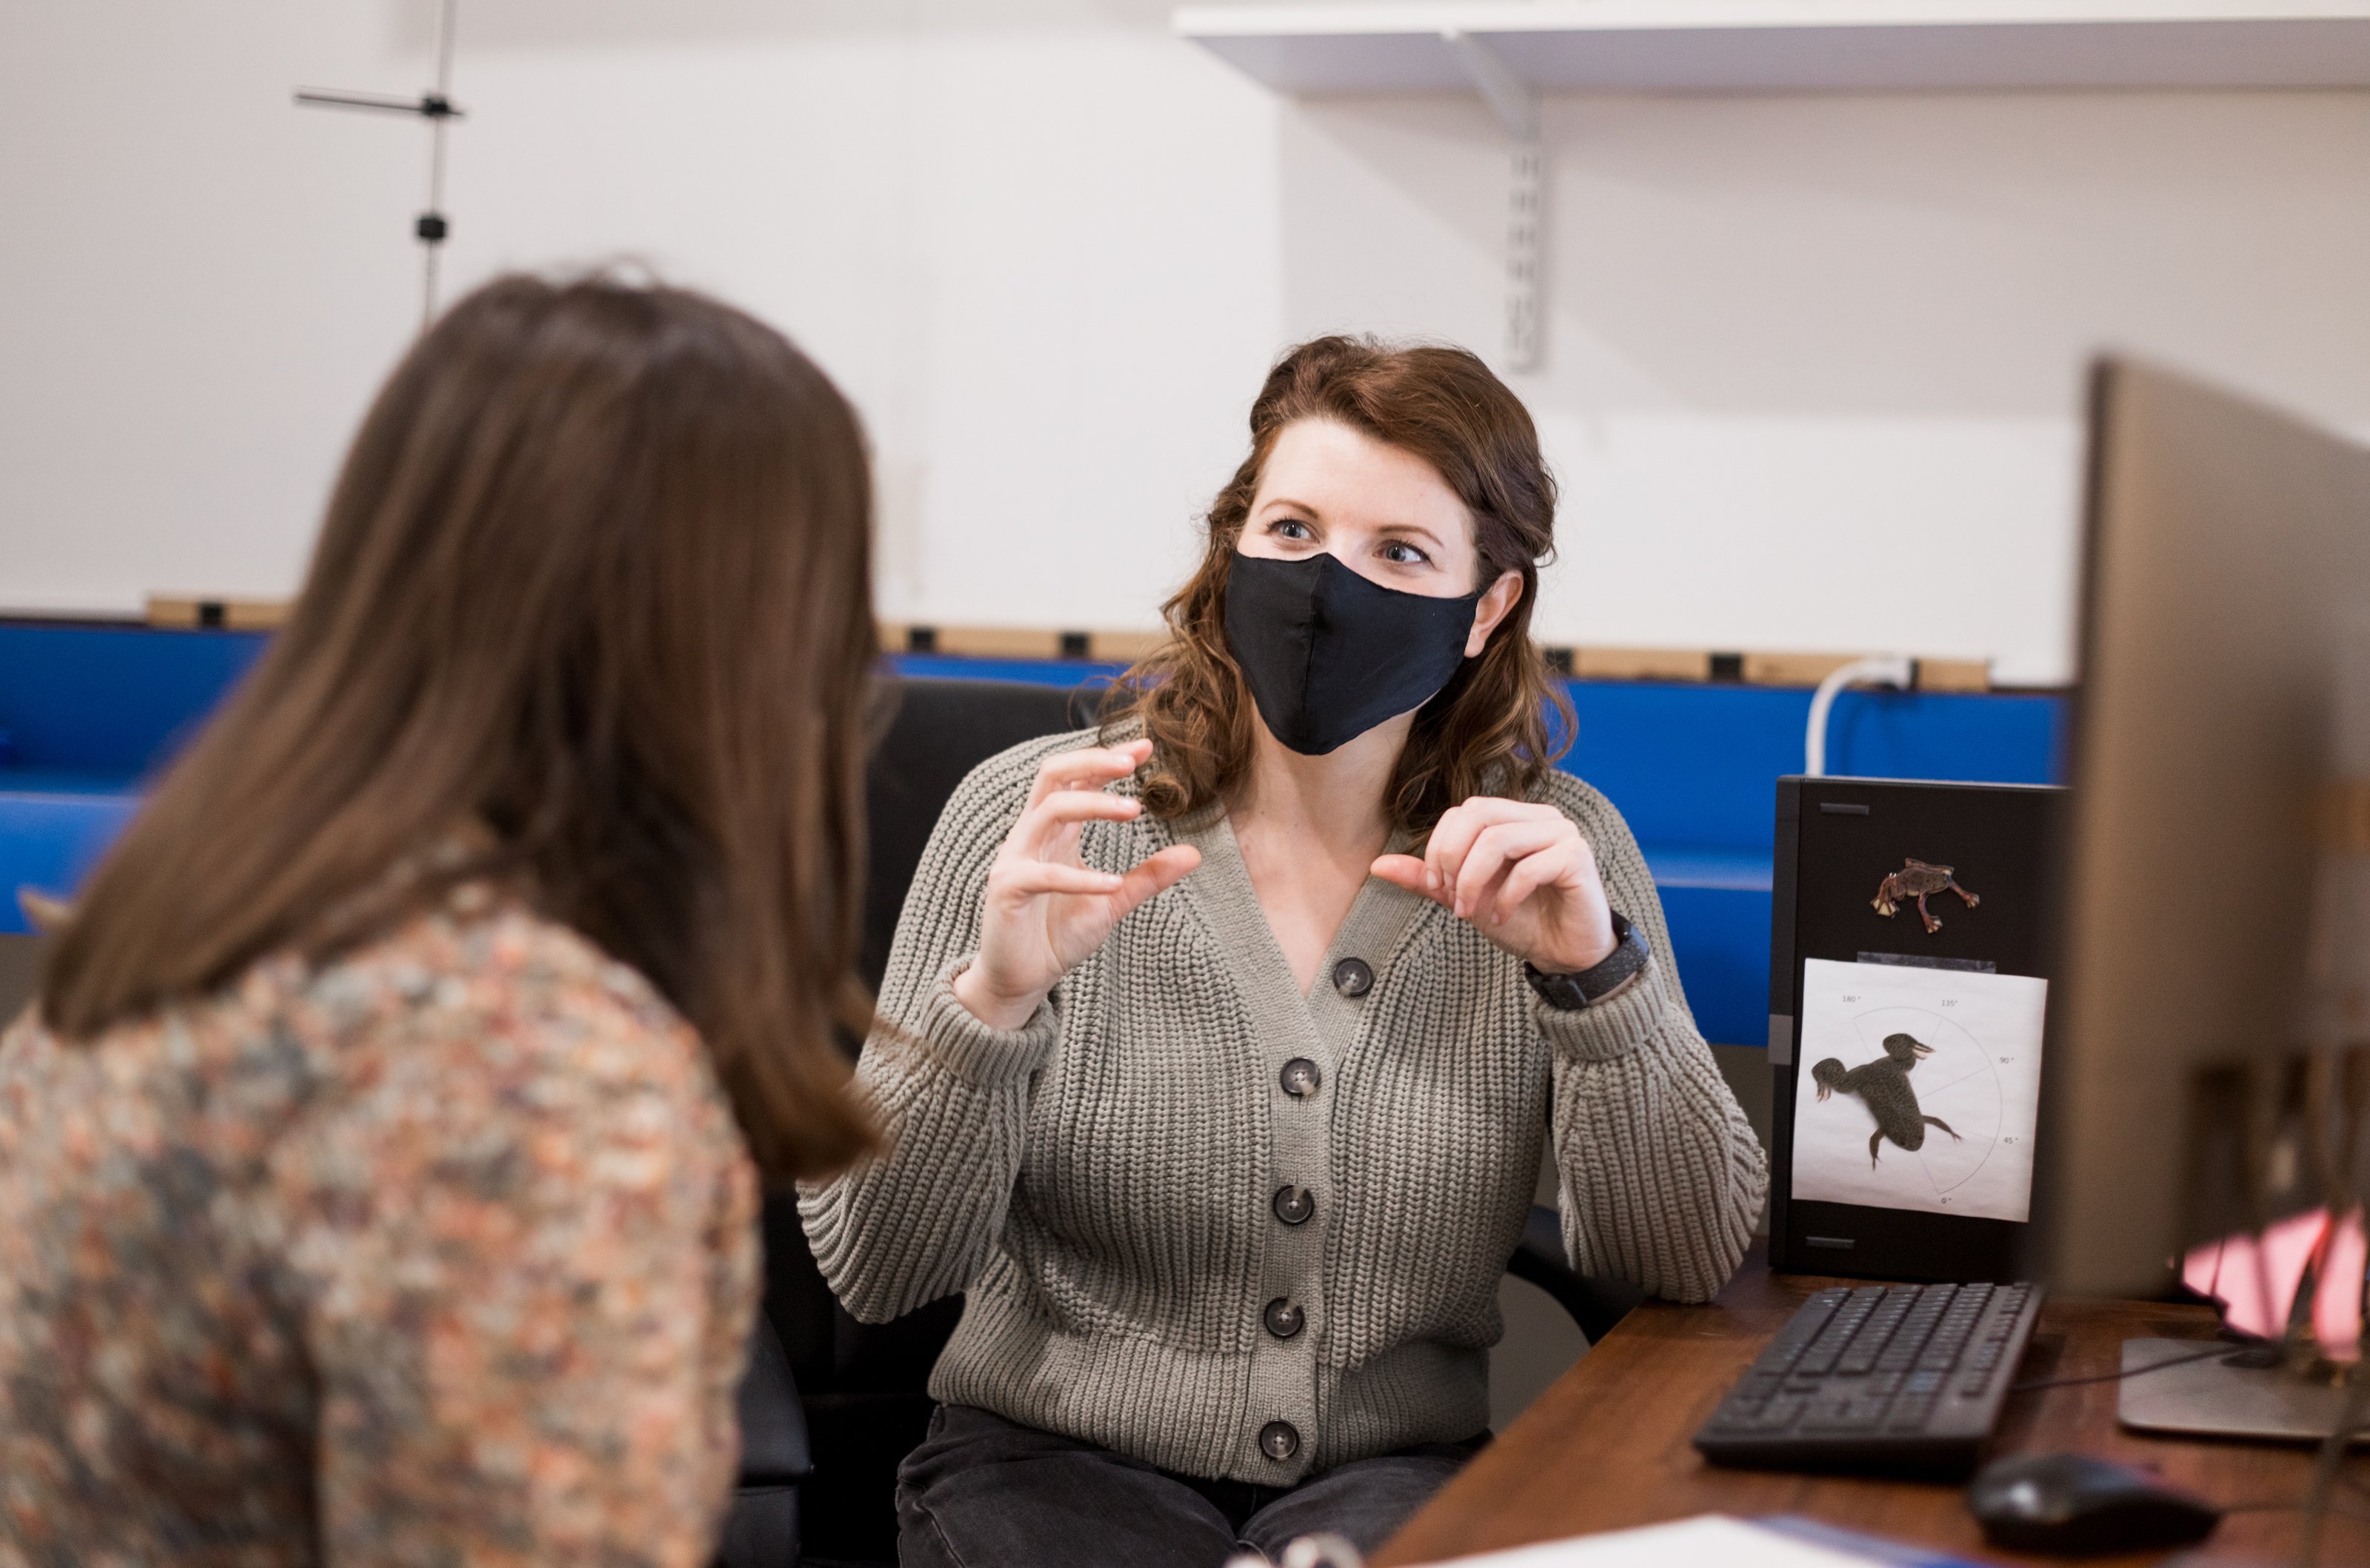 Maggie Keller, with her back to the camera, talks to Carly York, masked, in her office